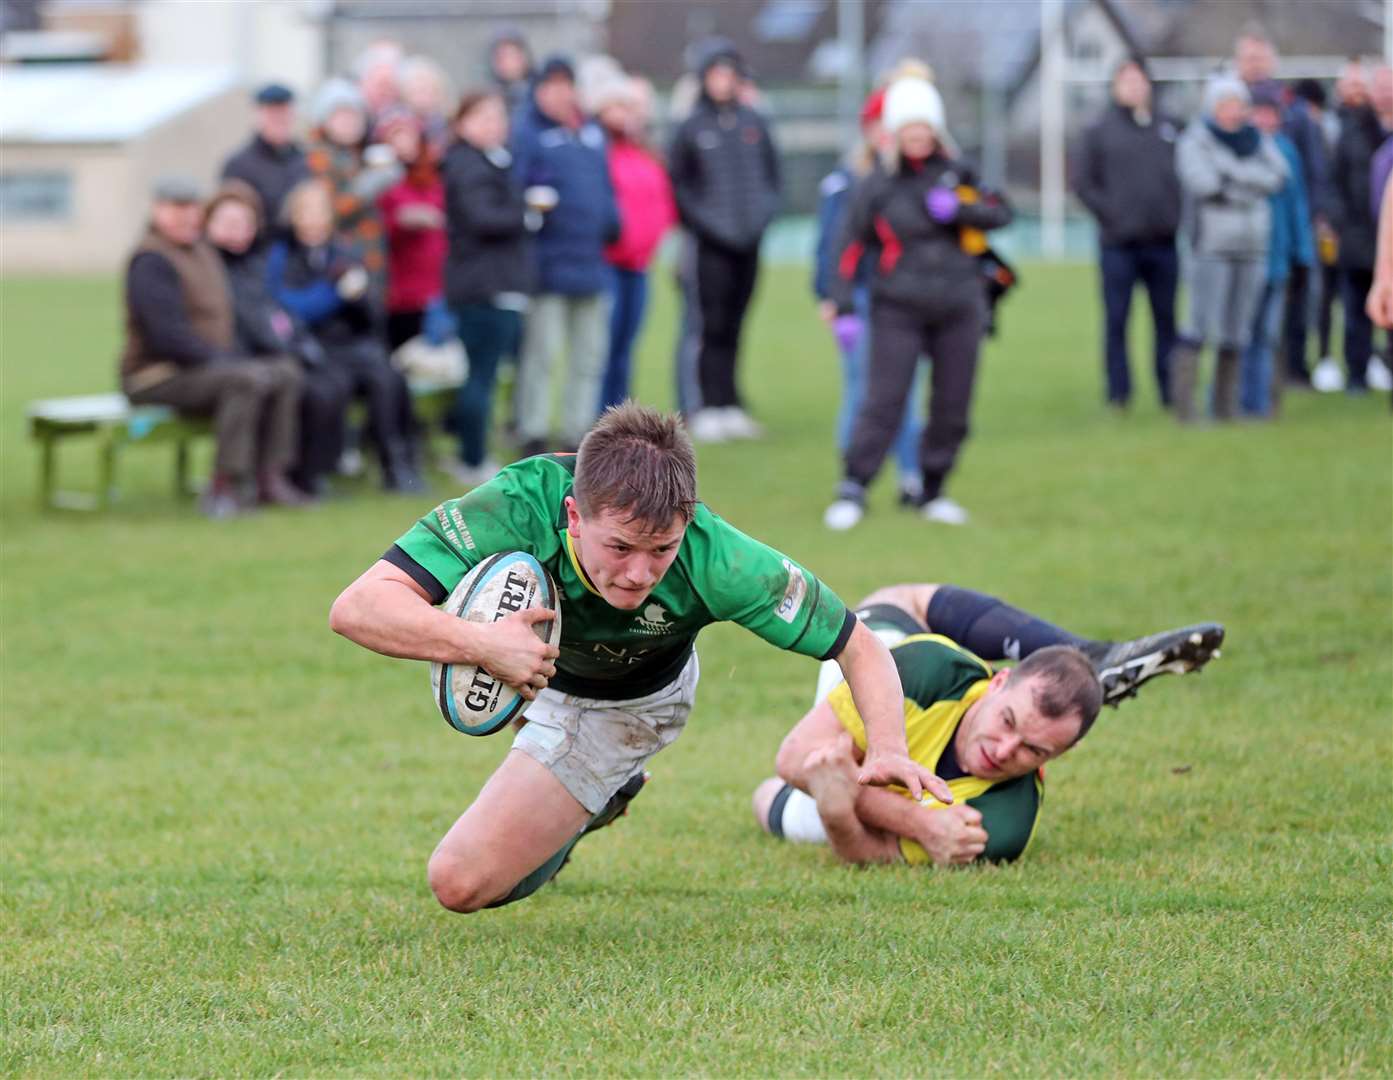 Scott Webster scoring a try for Caithness in the Boxing Day fixture two years ago. Picture: James Gunn